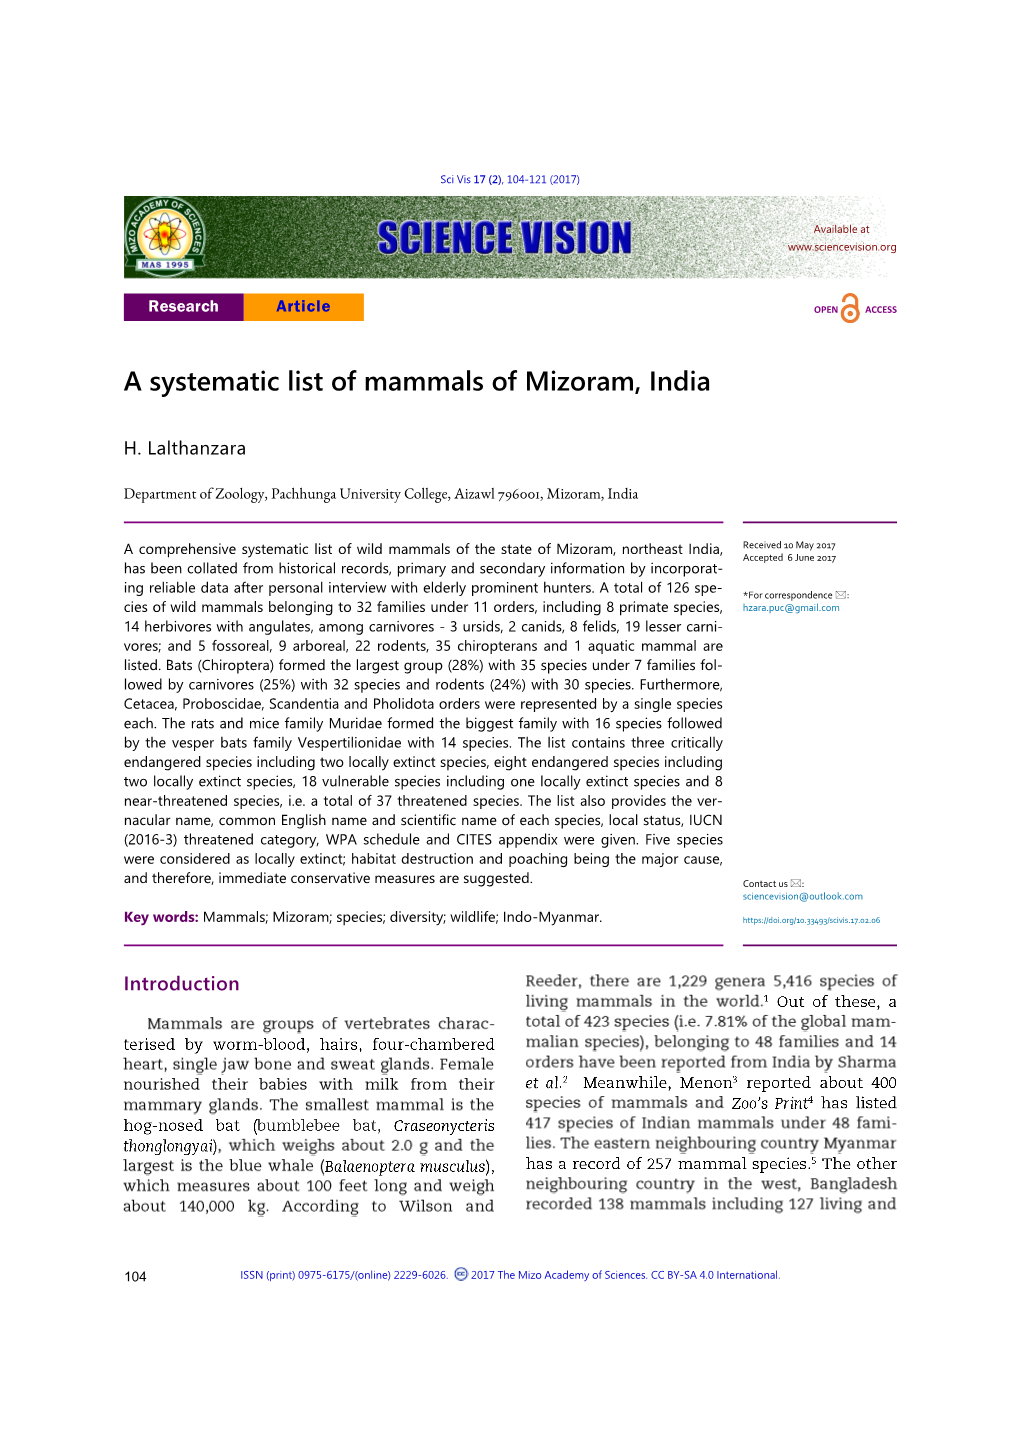 A Systematic List of Mammals of Mizoram, India